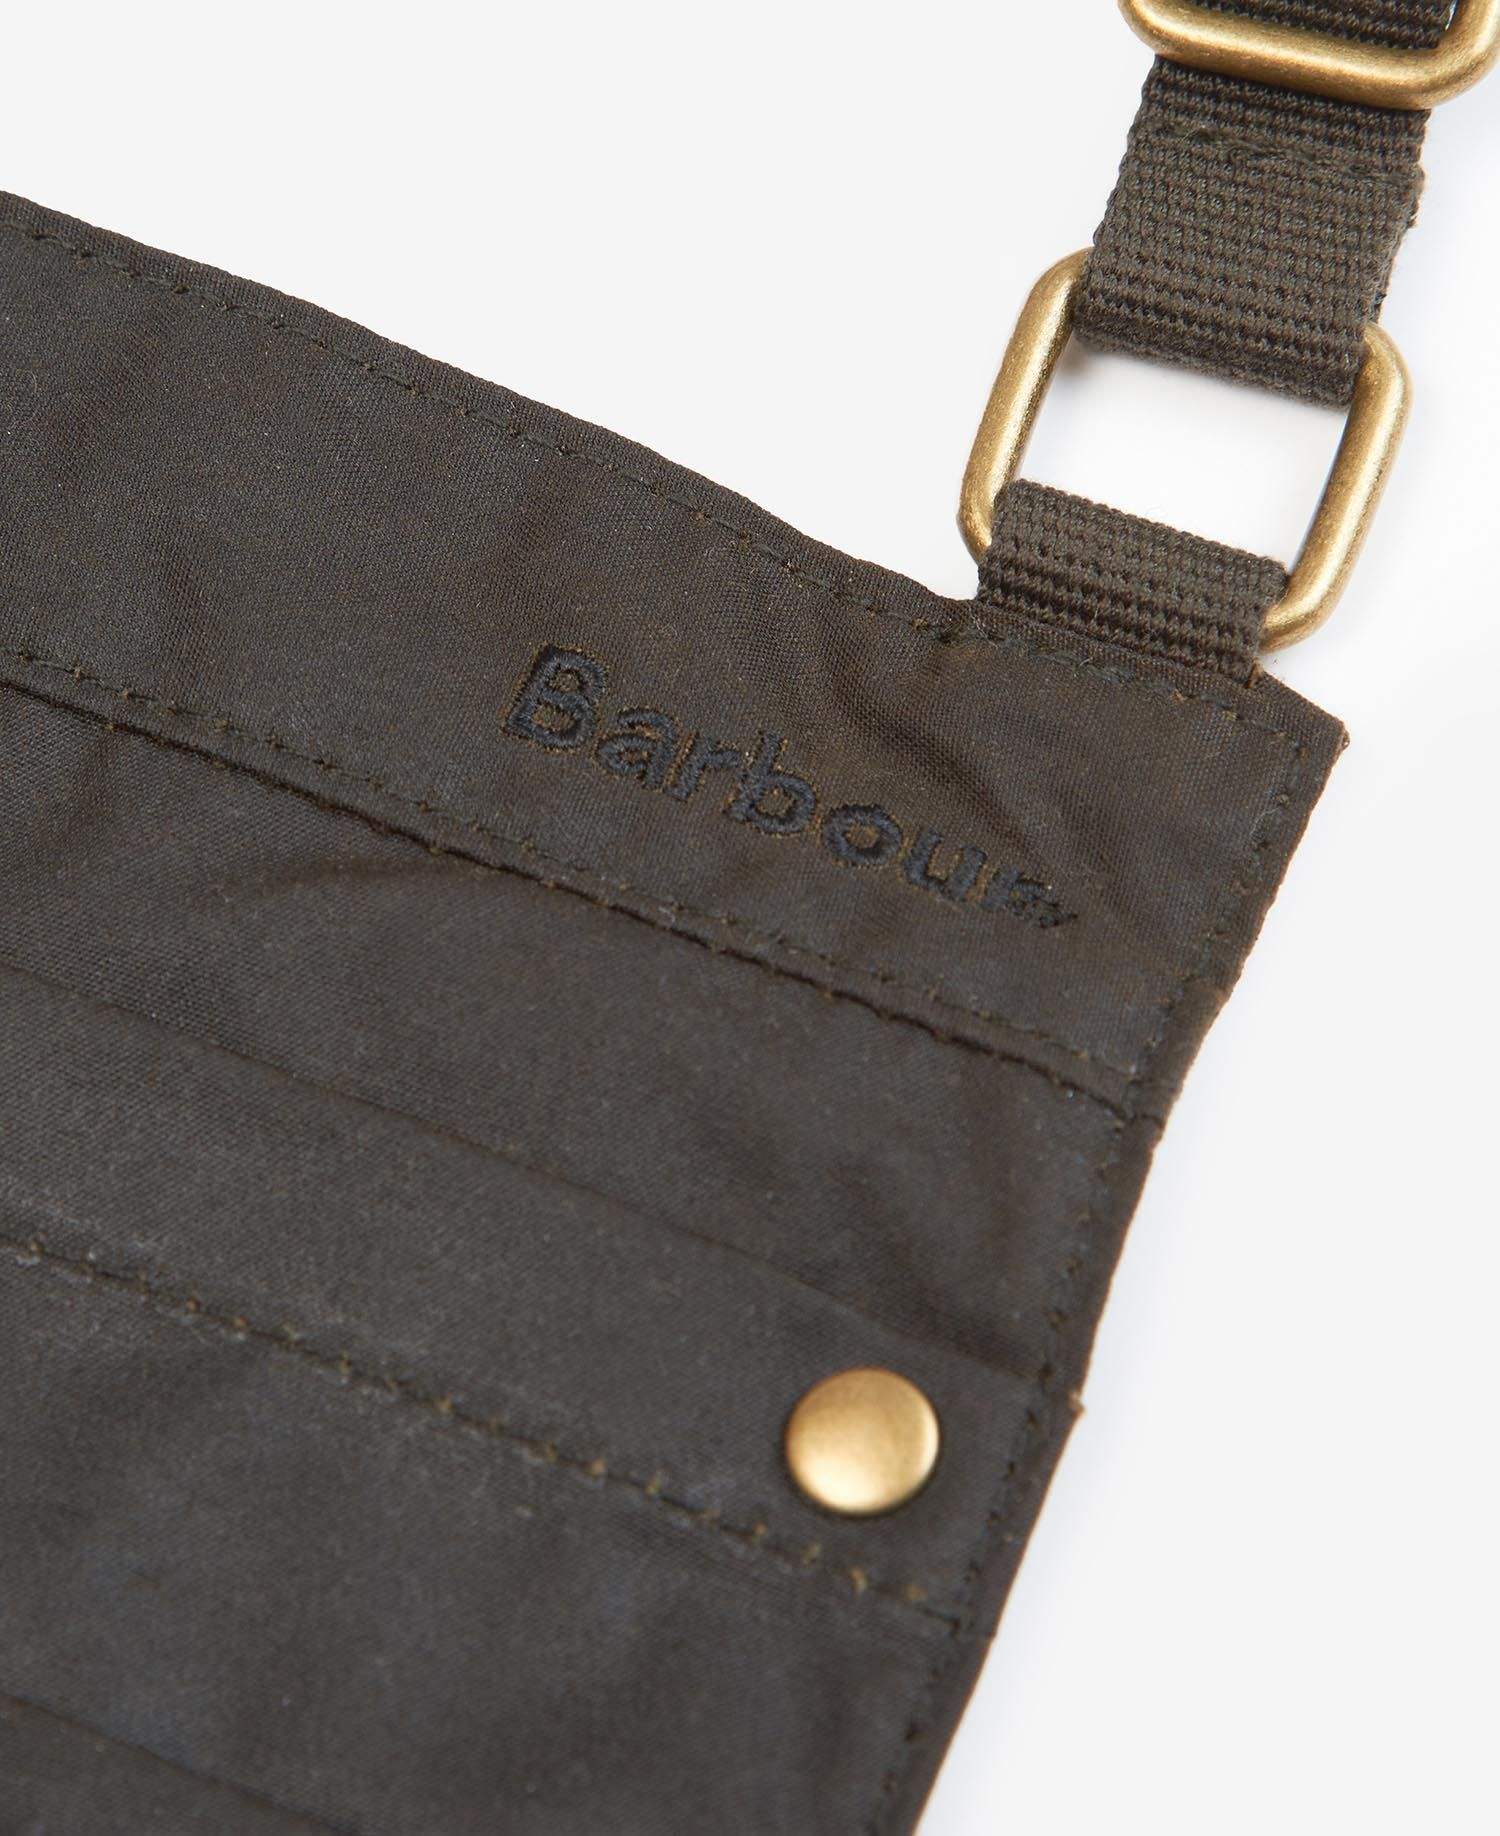 Barbour Dog Walkers Pouch - The Luxury Promotional Gifts Company Limited